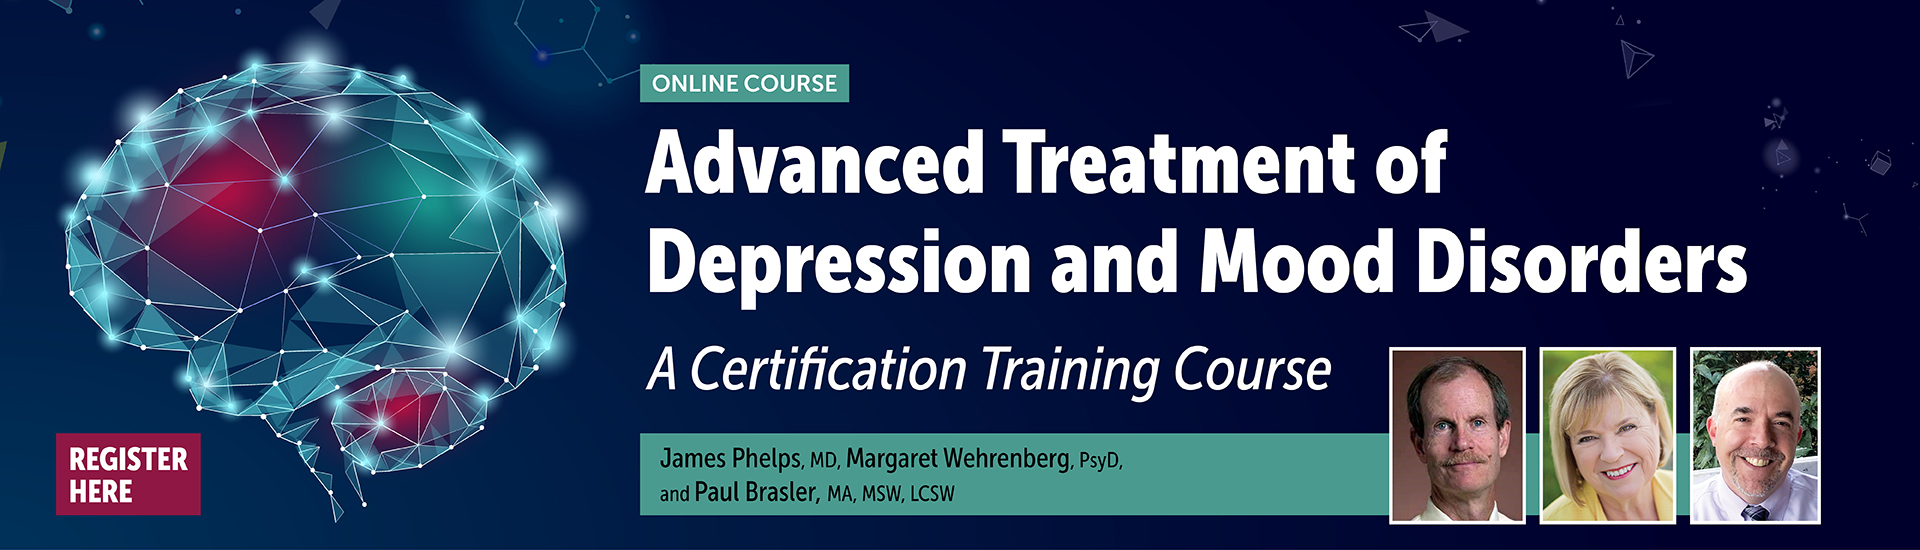 Advanced Treatment of Depression and Mood Disorders